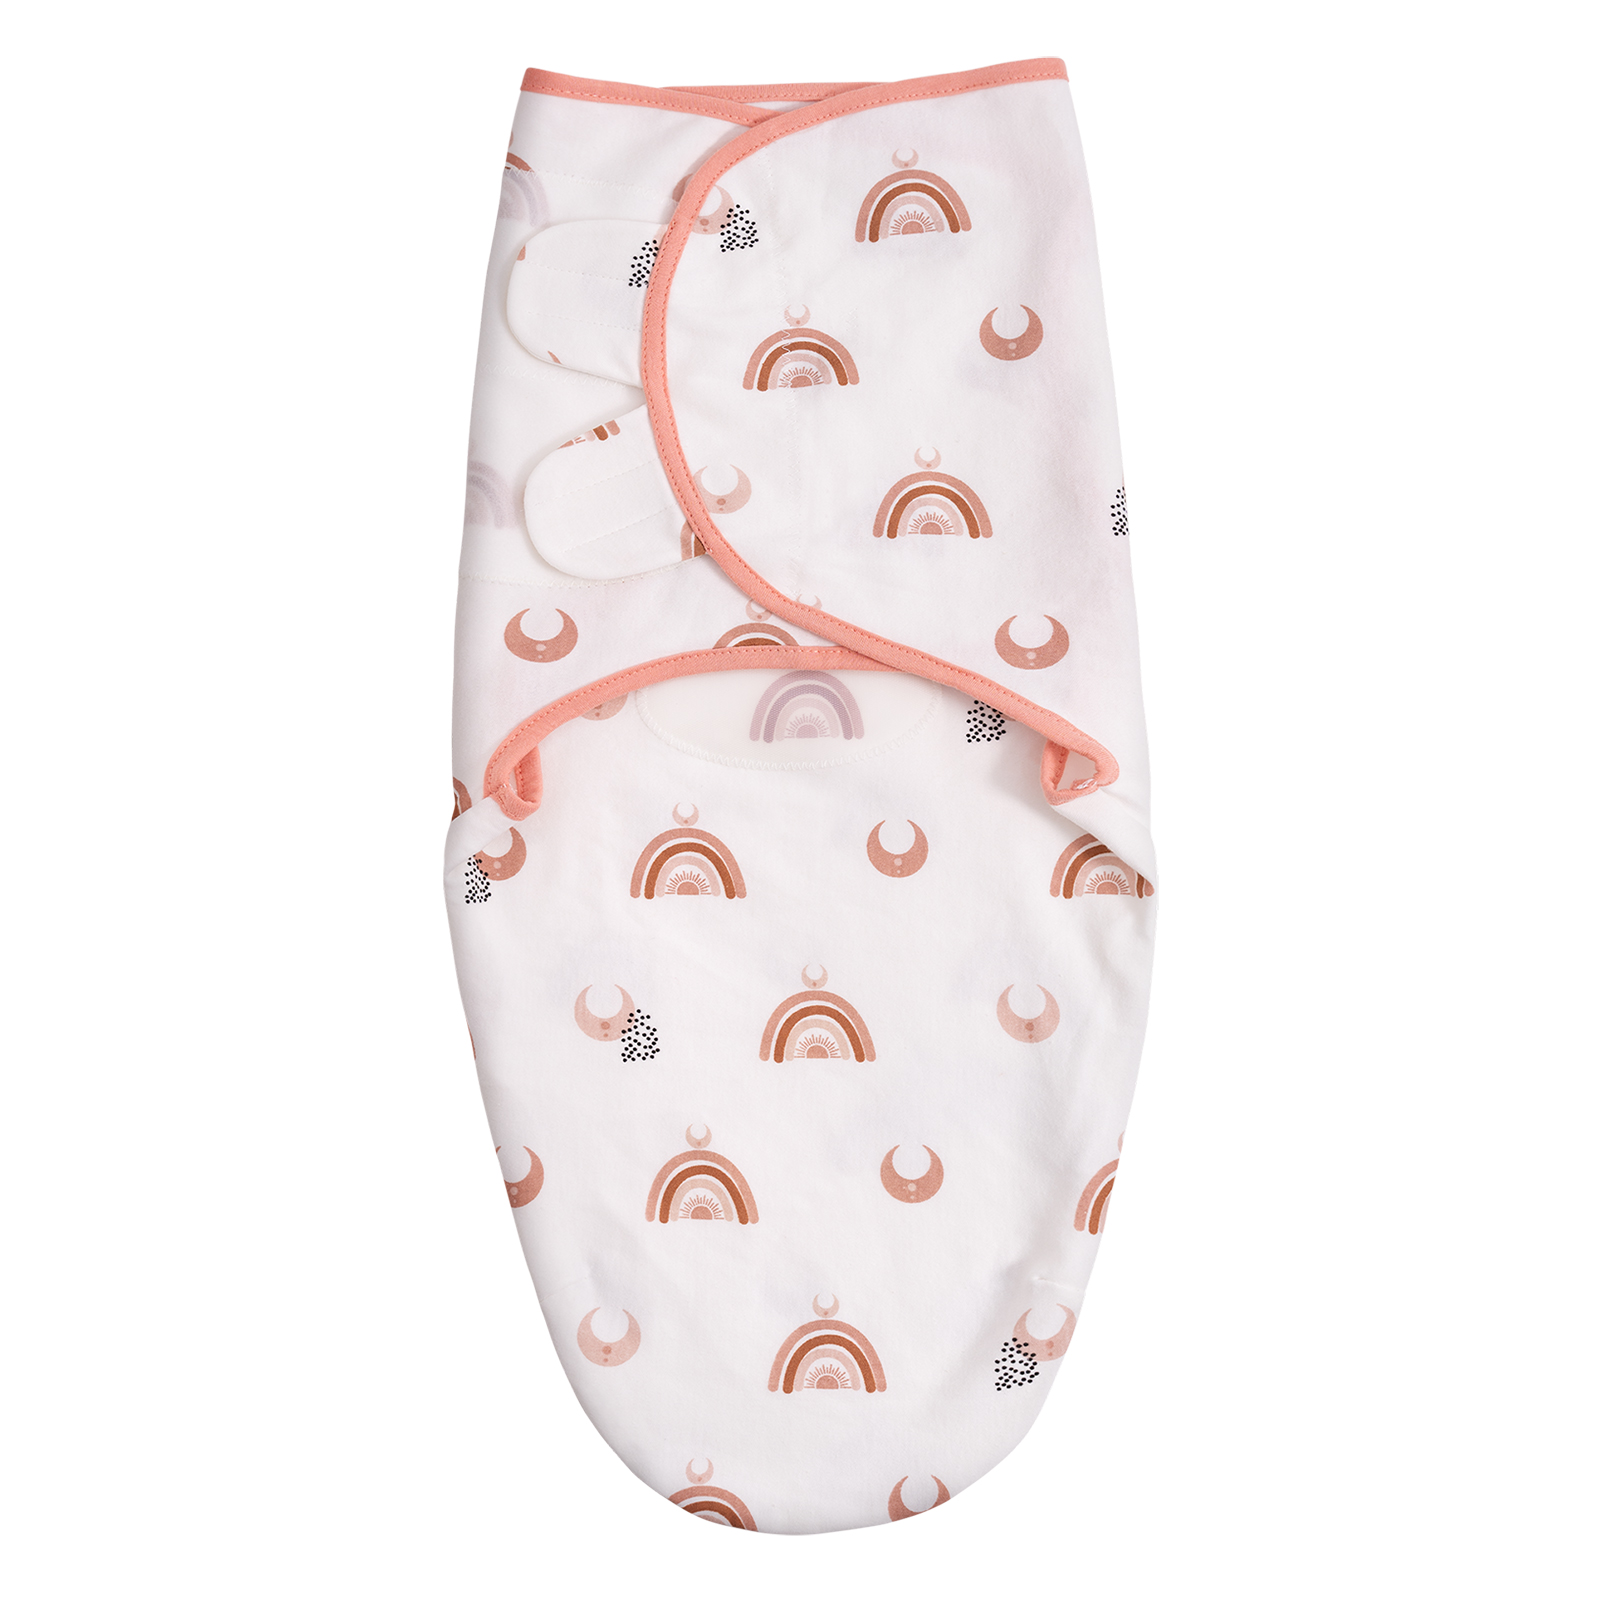 Grey Planet  Gllquen Baby Swaddle 0-3 Months 3 Pack